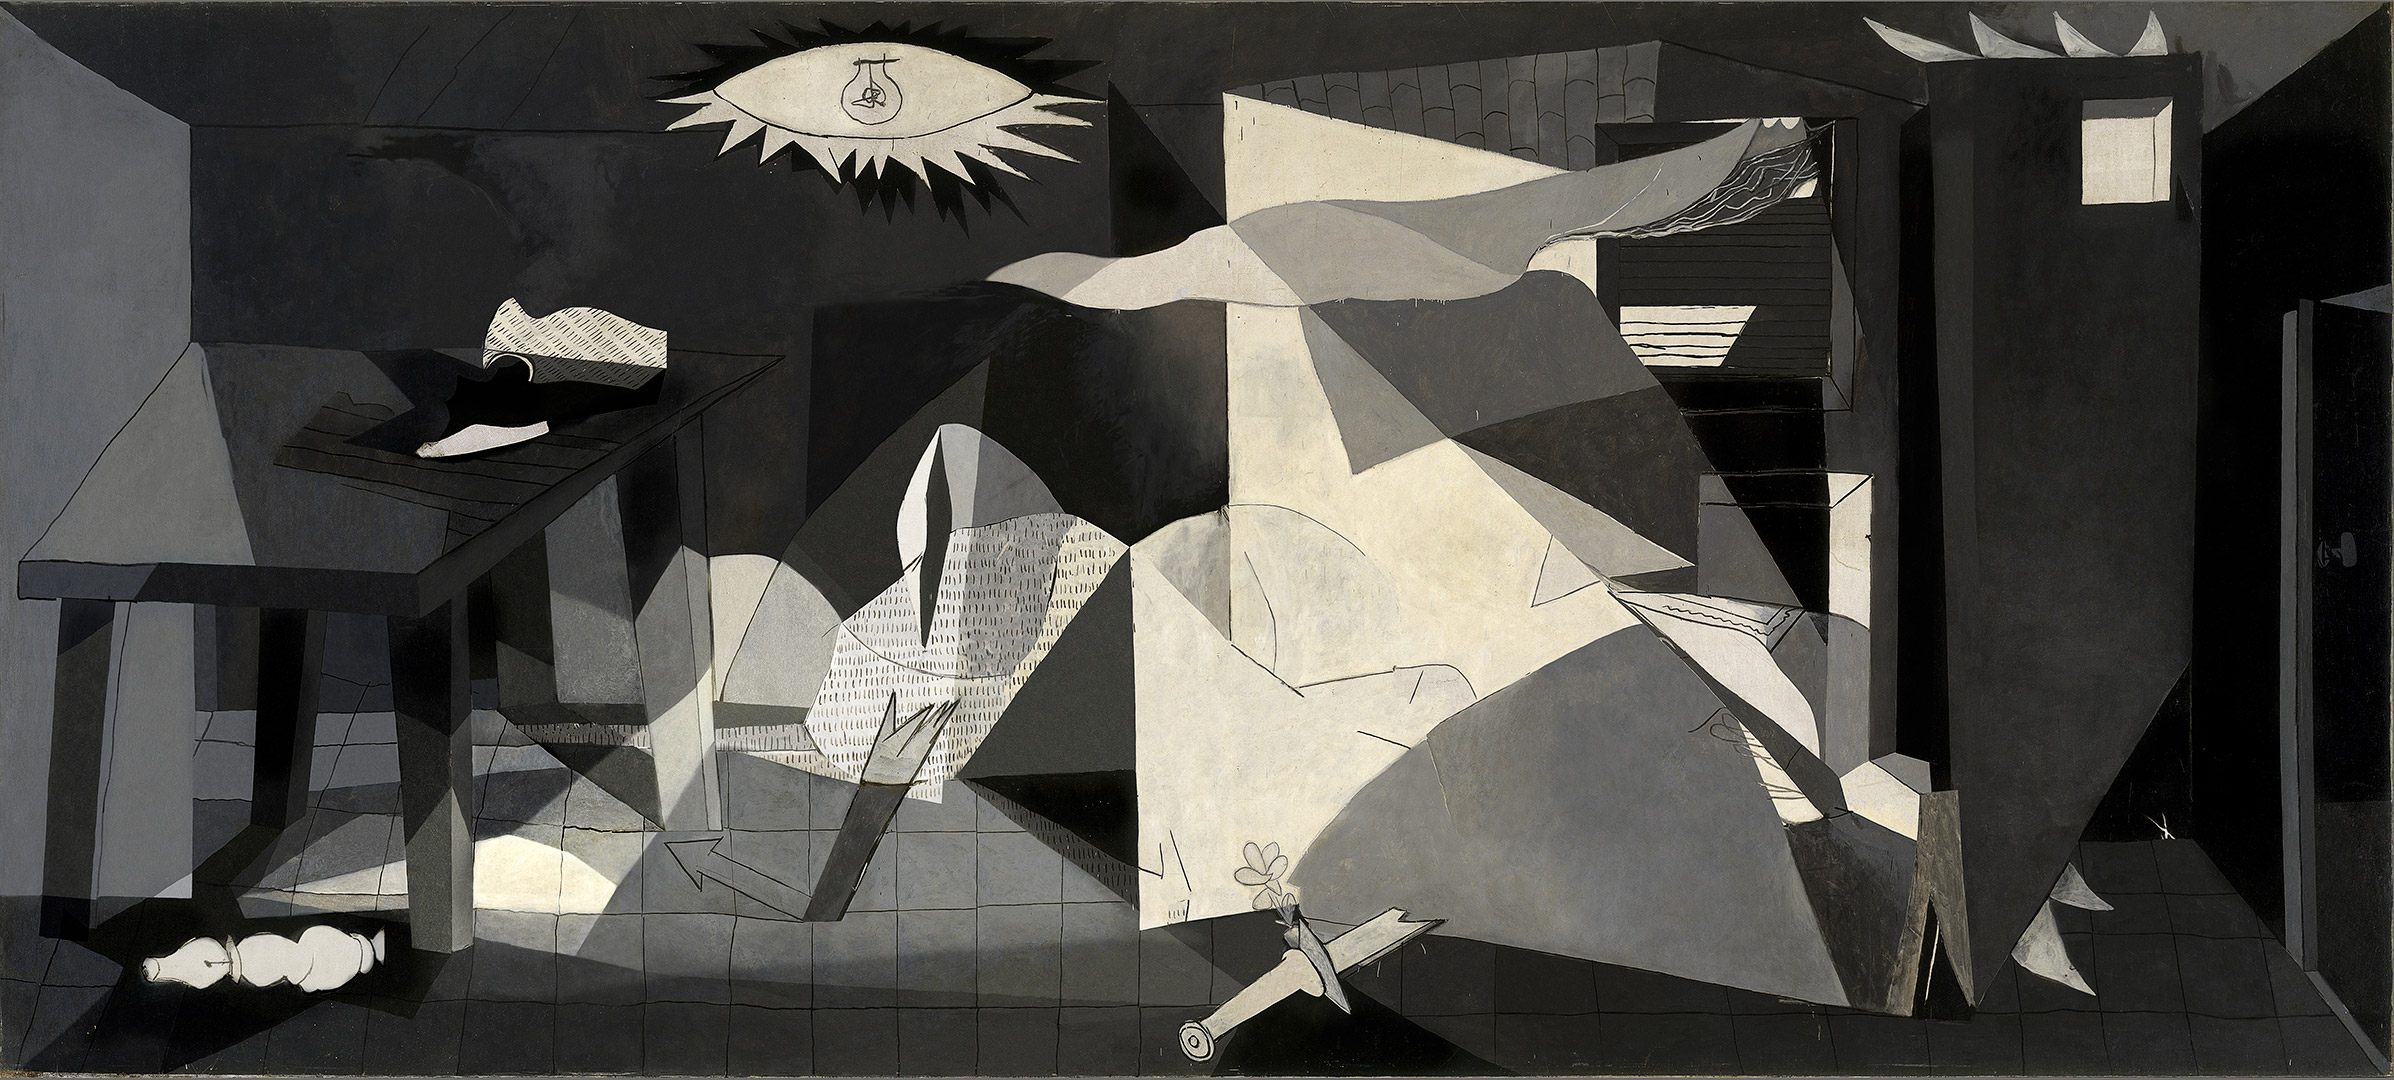 About the Guernica (En torno al Guernica) - UVI printing on linen, varnished